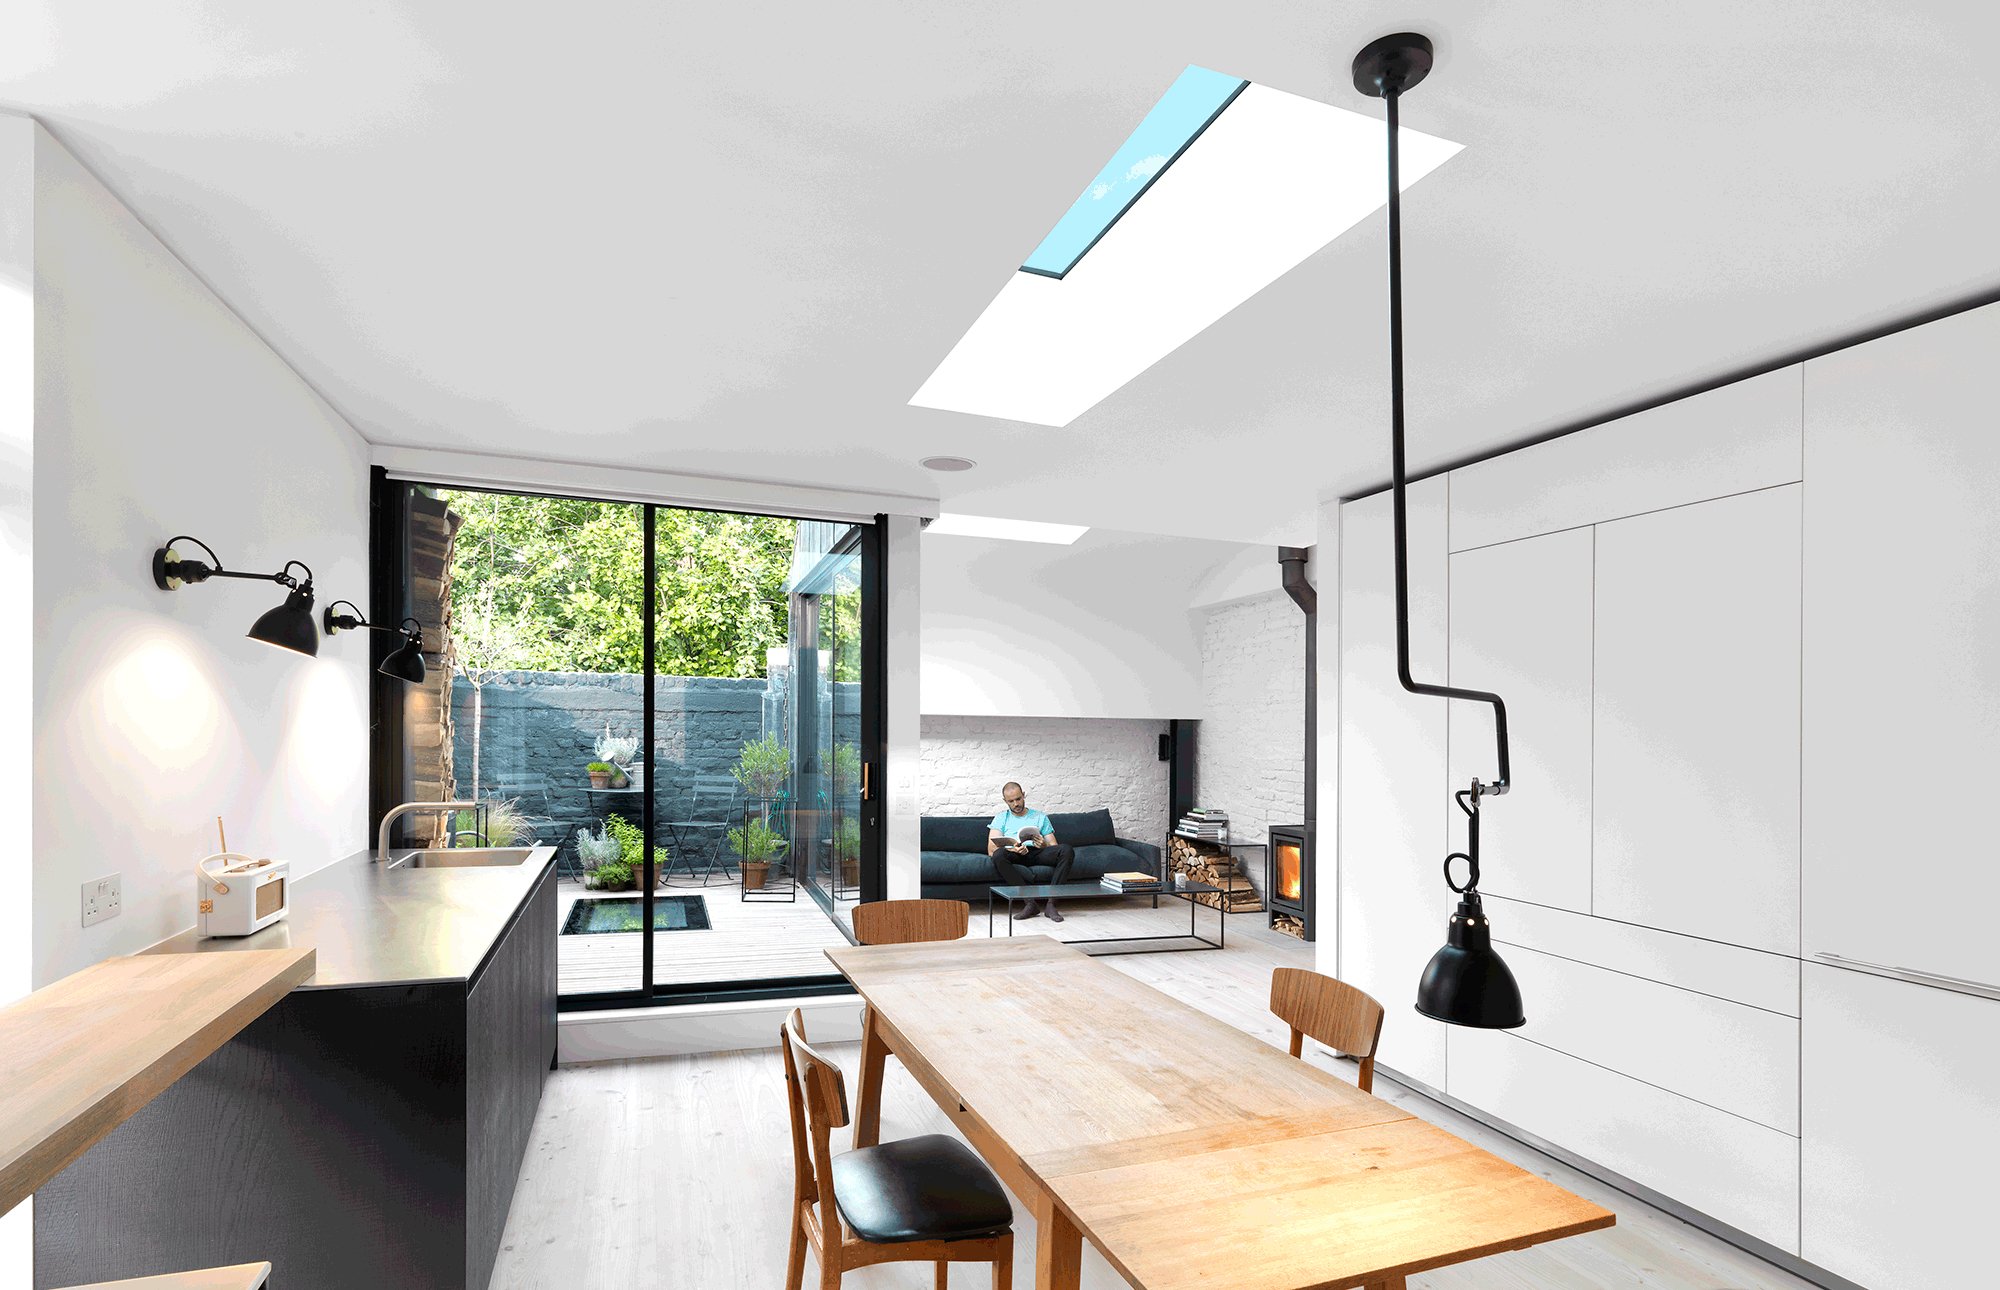 Rooflight in scheme by three-fold architects